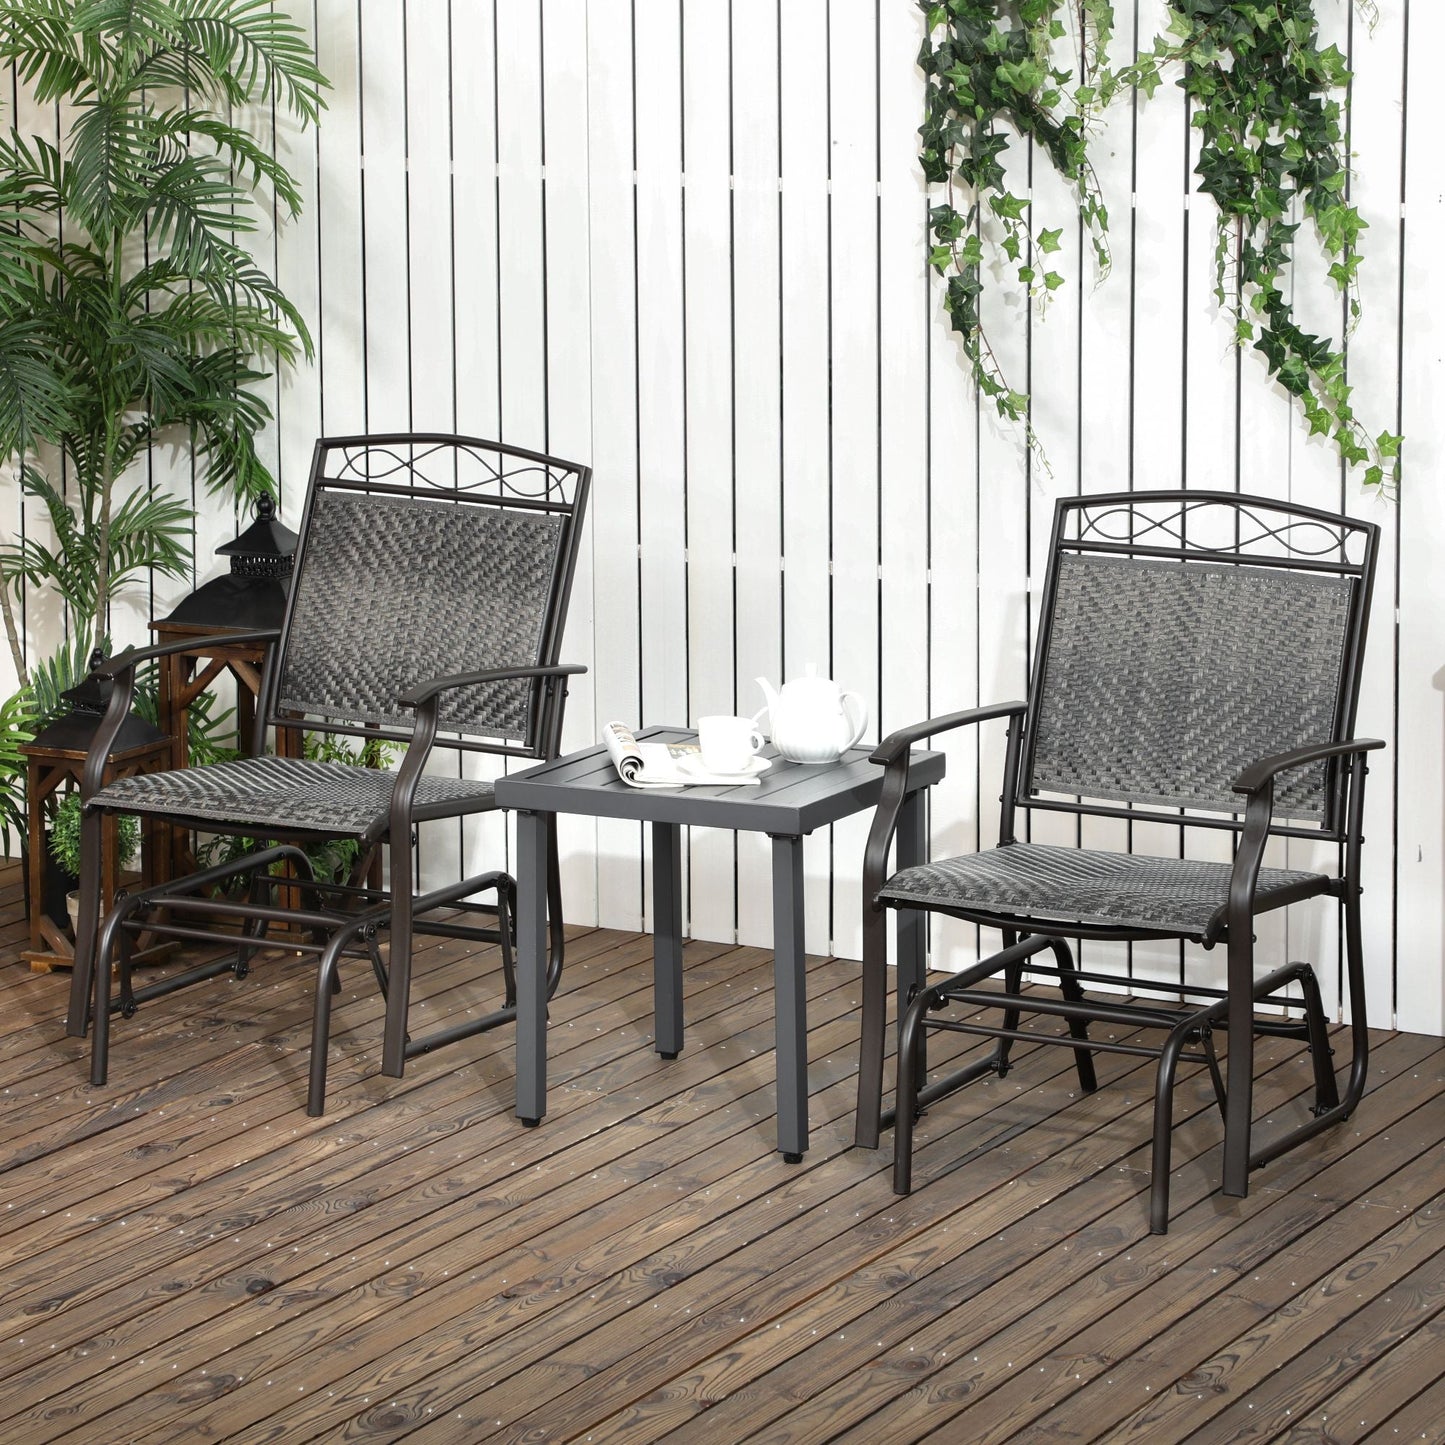 Outdoor and Garden-Set of 2 Outdoor Glider Chairs, Porch & Patio Rockers for Deck with PE Rattan Seats, Steel Frames for Garden, Backyard, Poolside, Gray - Outdoor Style Company